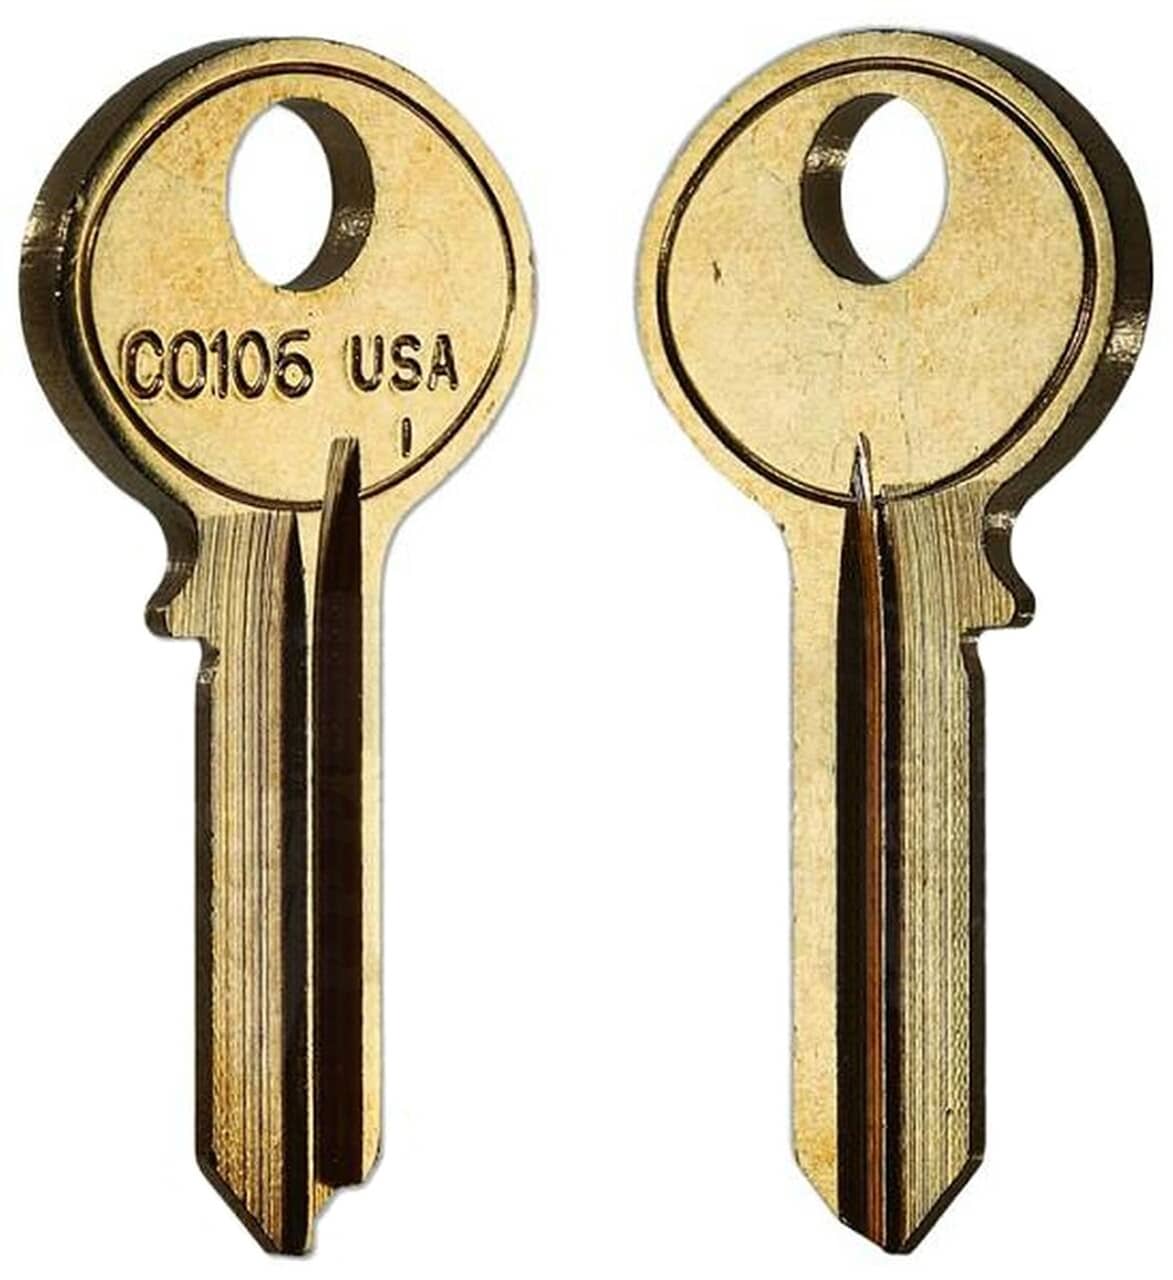 Co106-BR key blank for mailbox